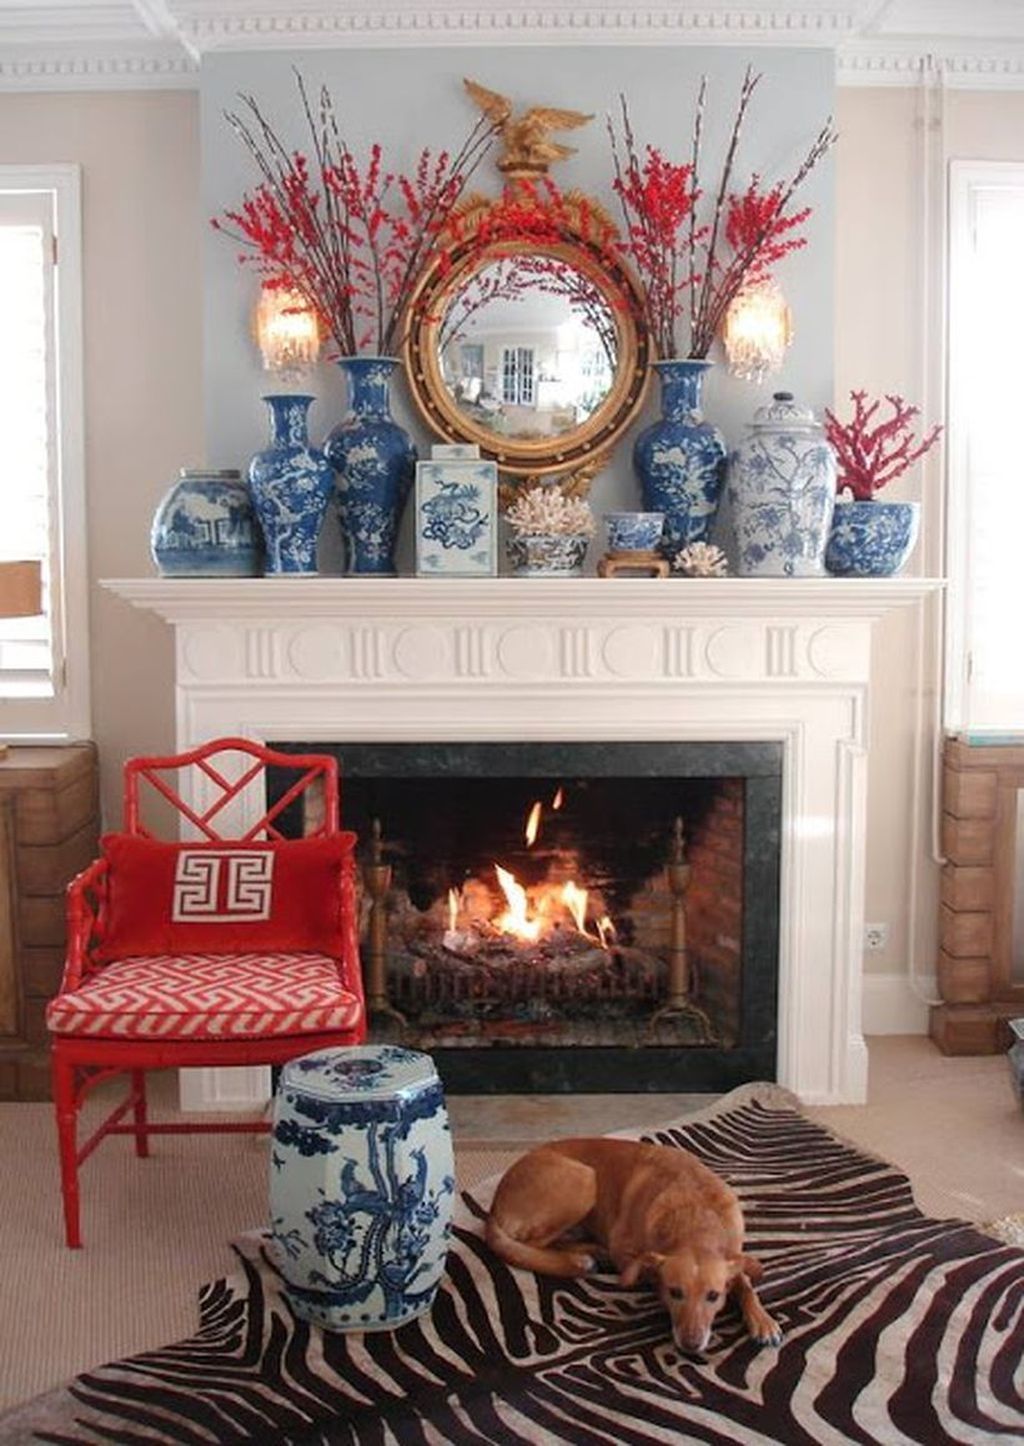 How to Fix A Fireplace Elegant 243 Best Decorate Your Fireplace and Mantel Images In 2019